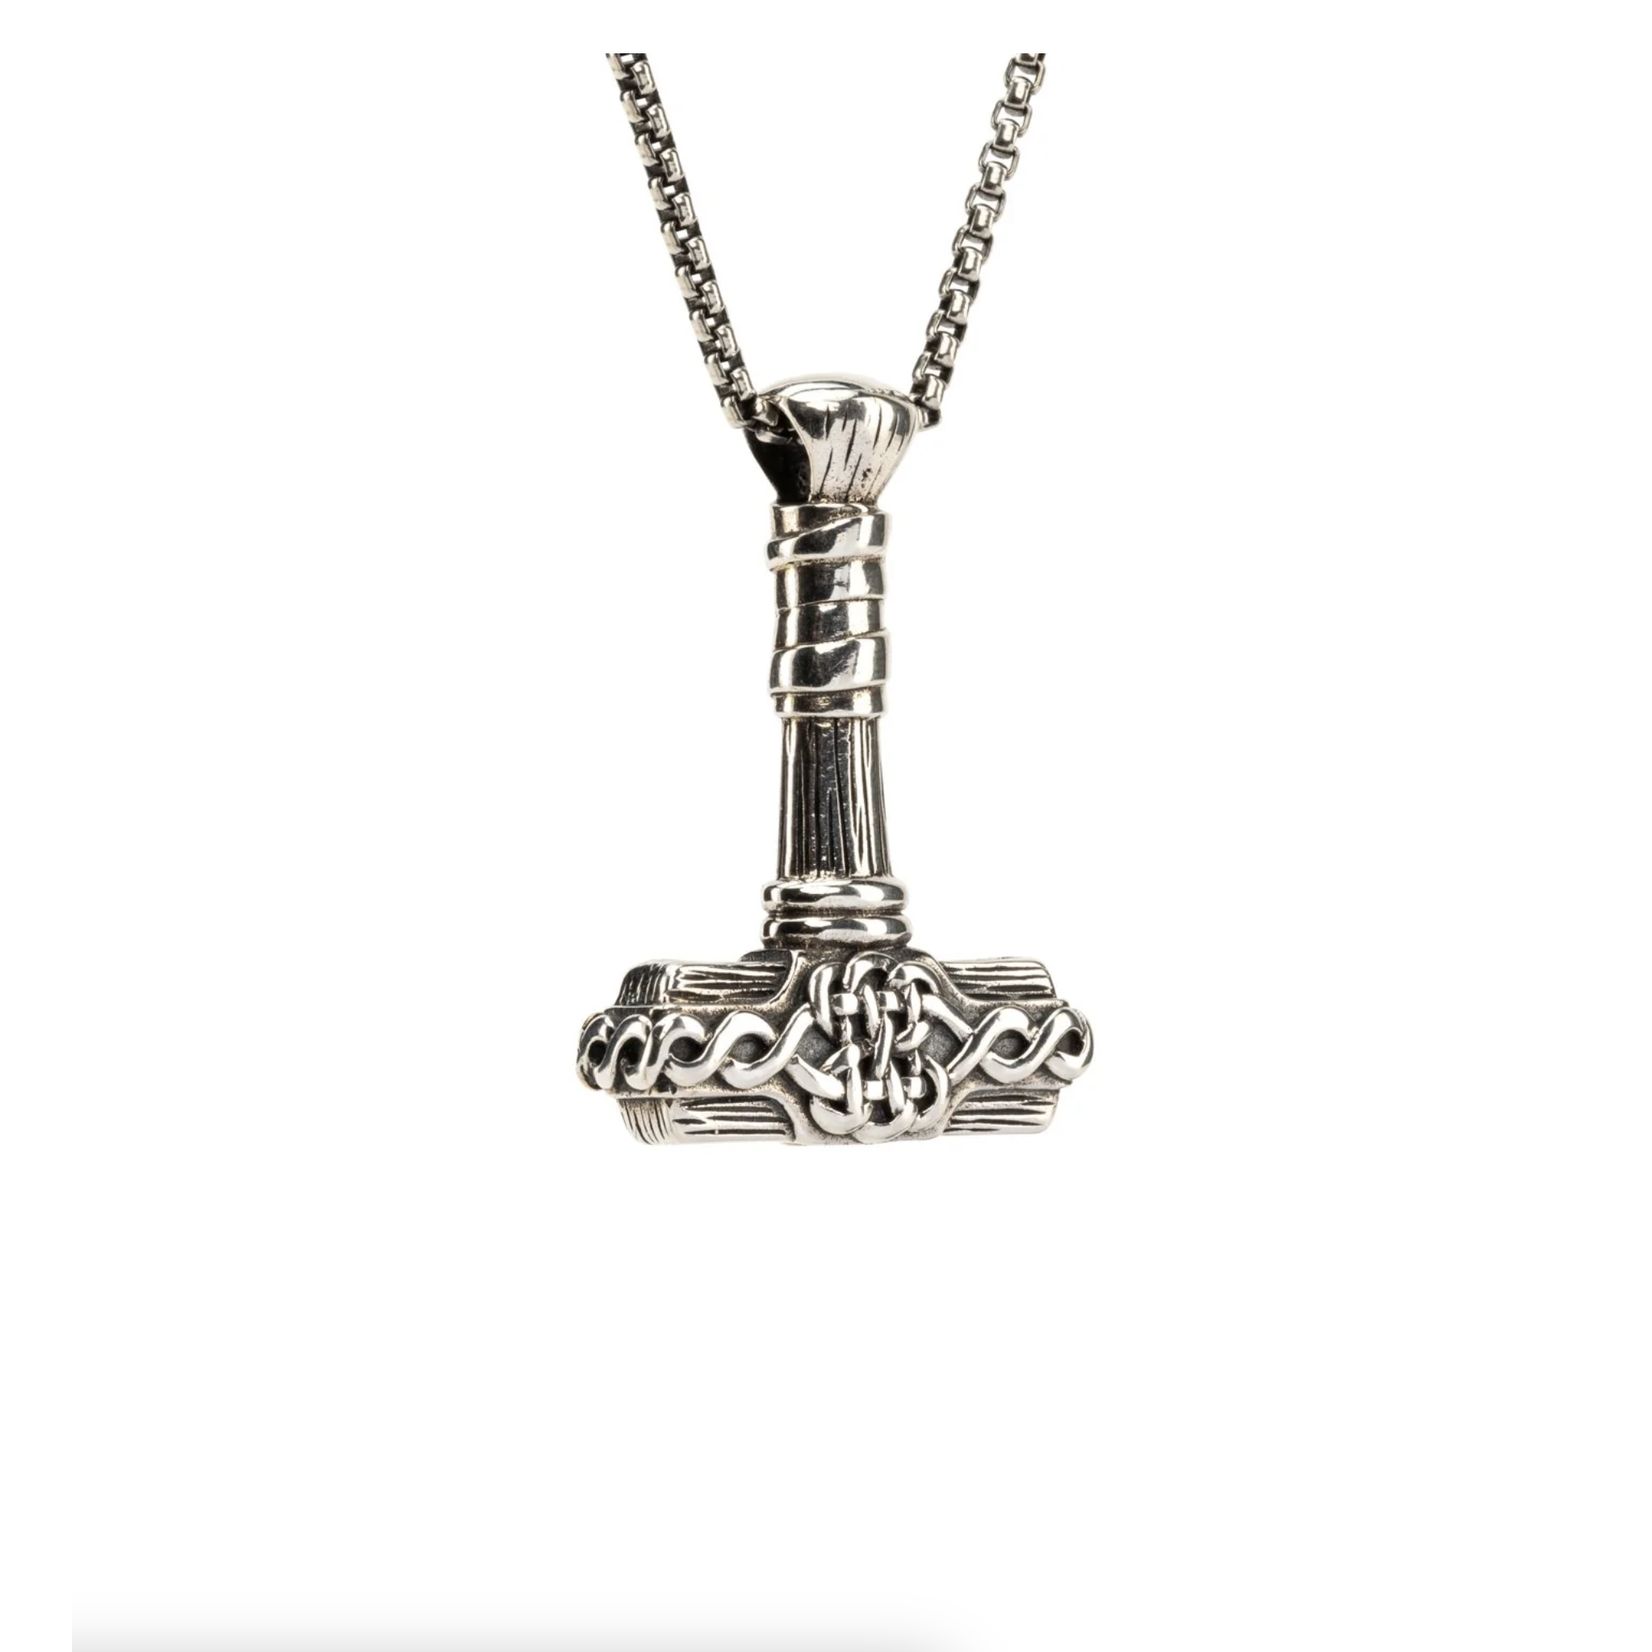 Keith Jack Silver & Bronze Reversible Thor's Hammer Necklace